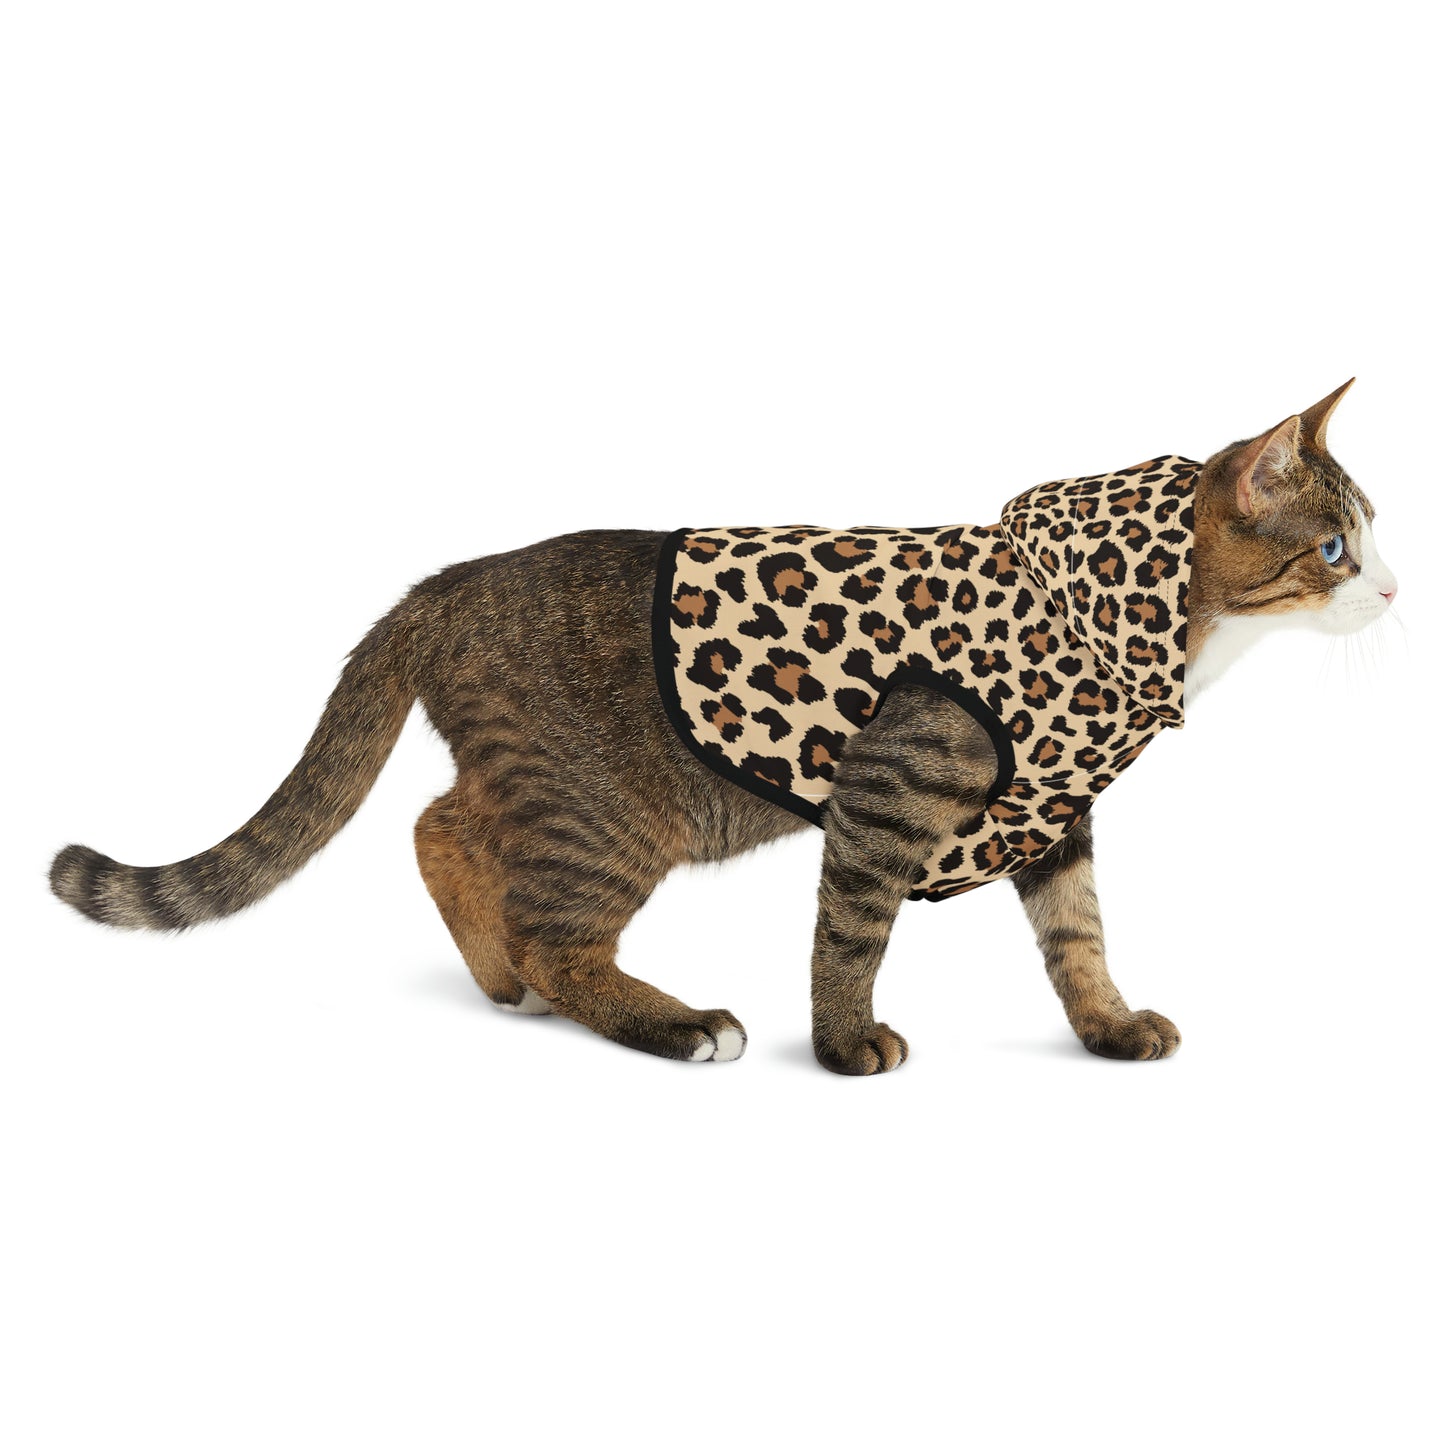 Pet Hoodie - Turn Your Cat Into A Cheeta! 5 Sizes To Choose From